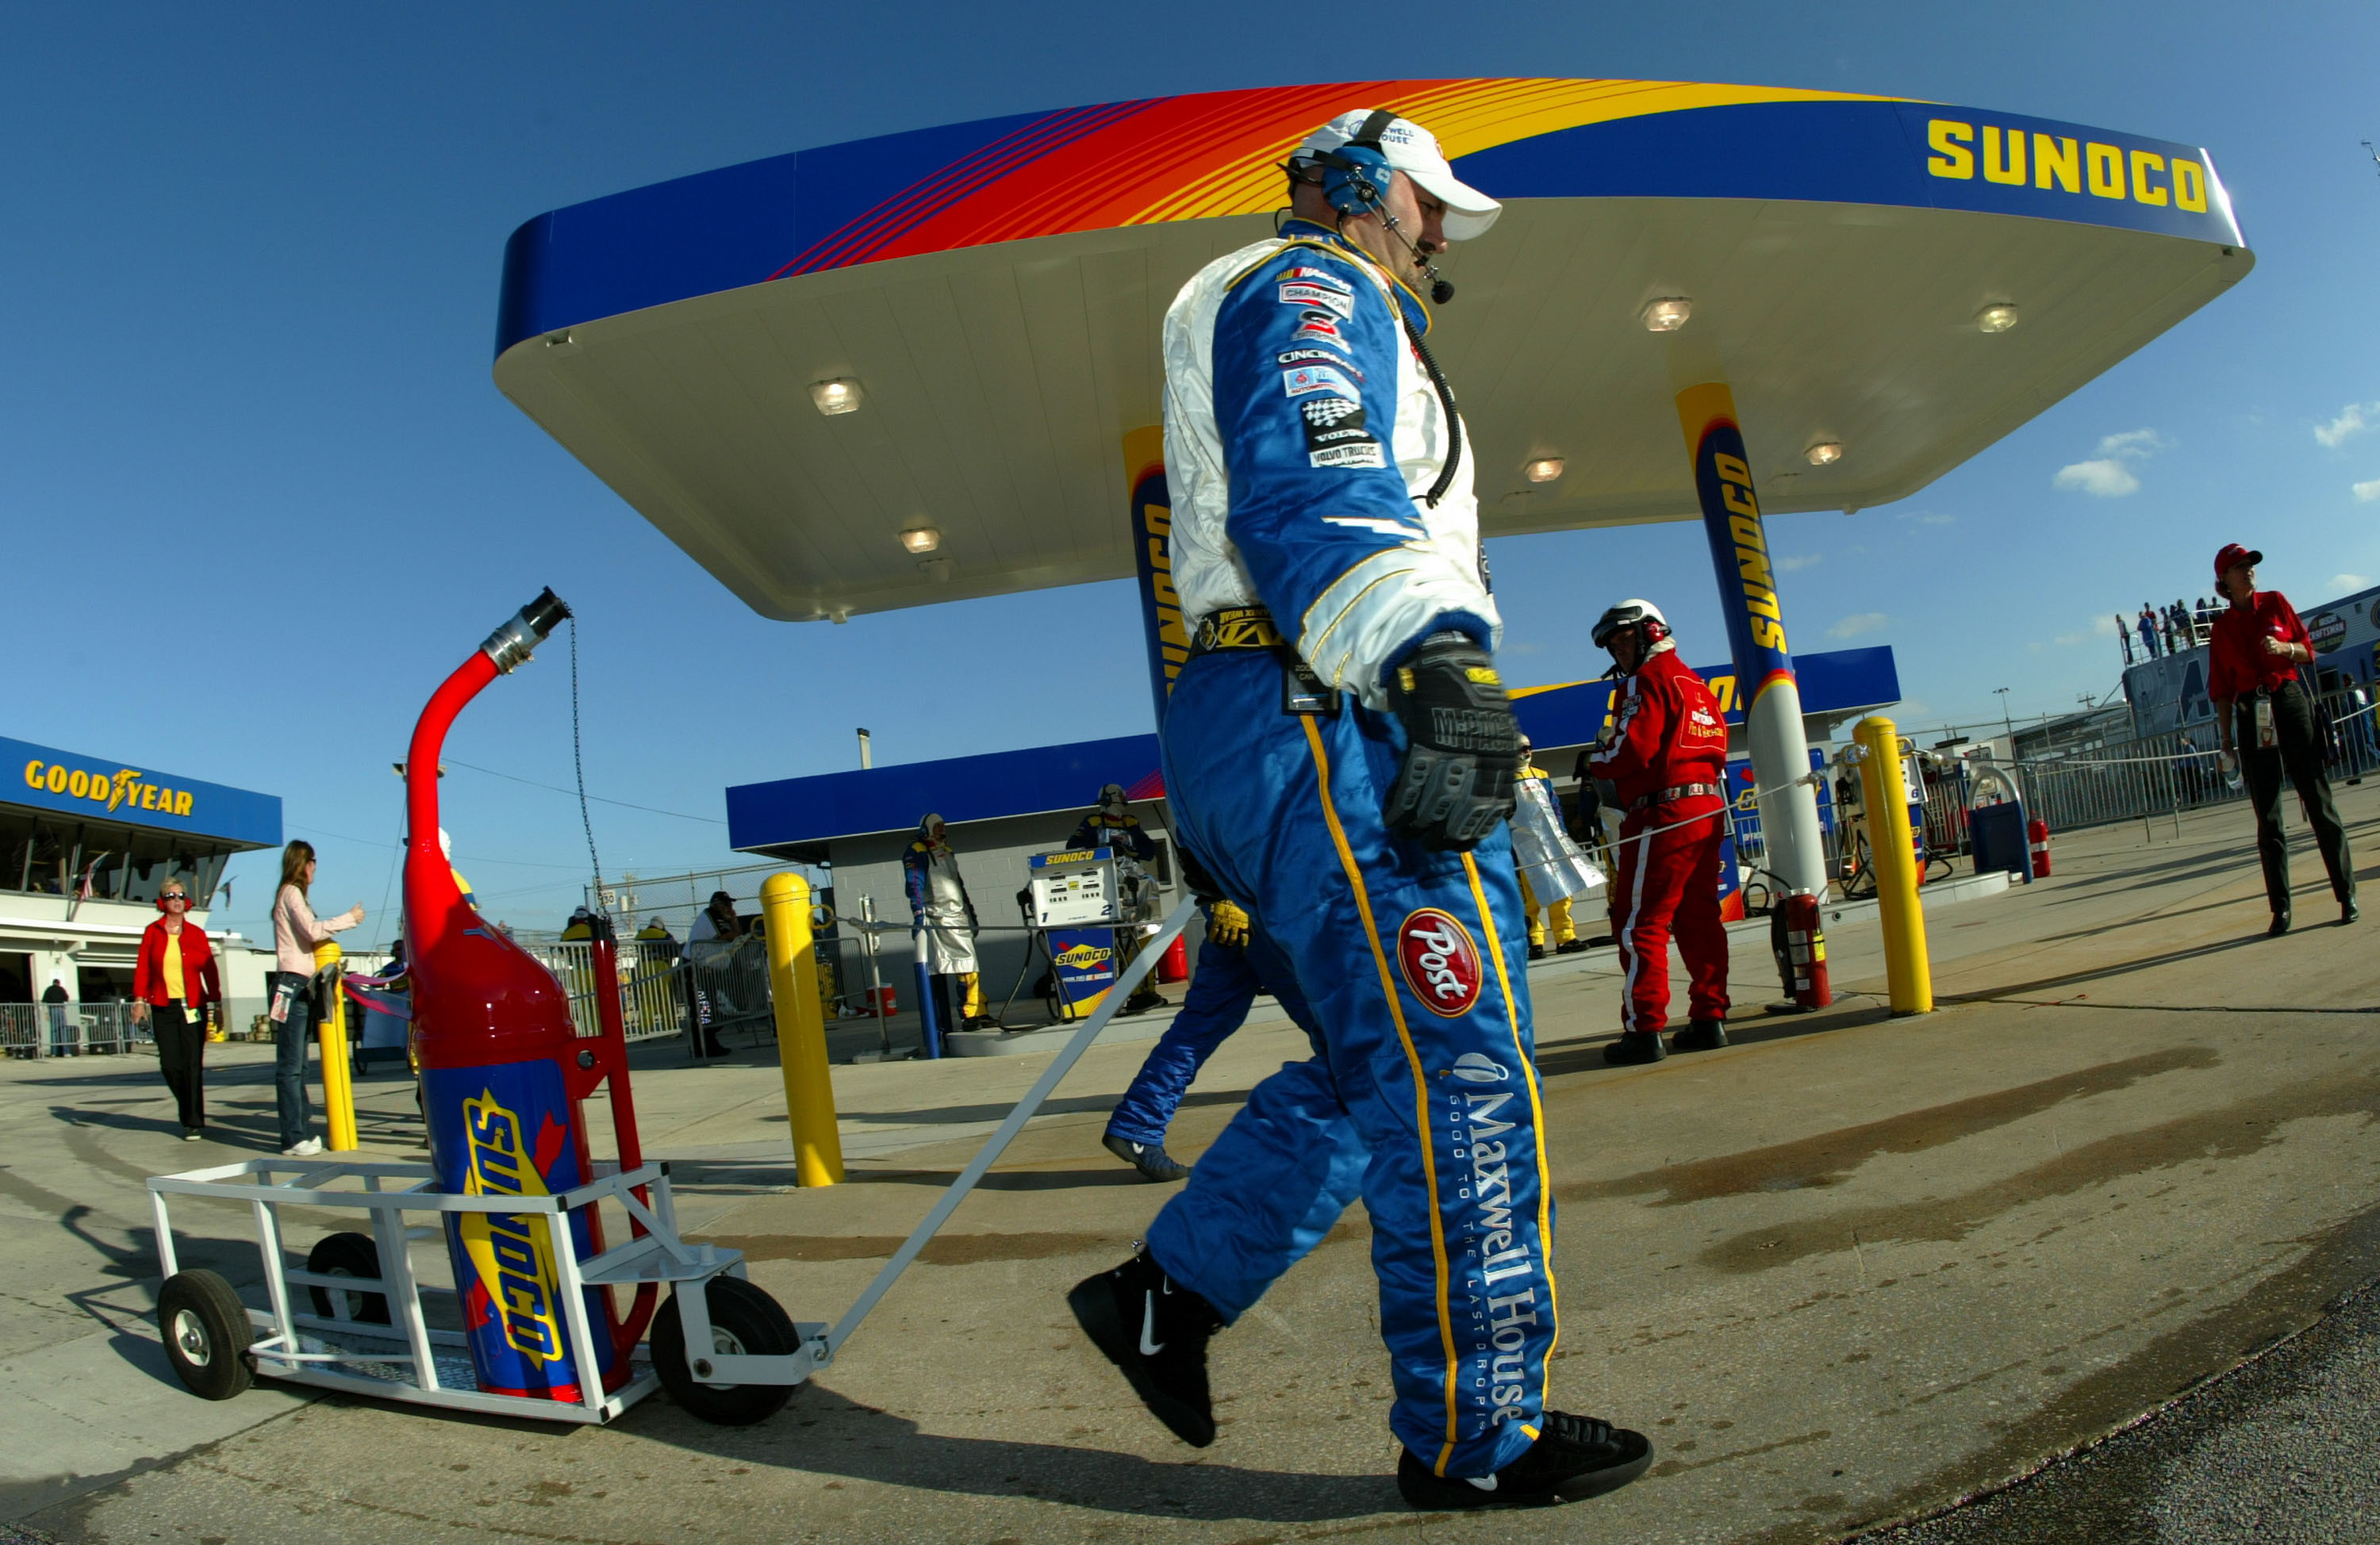 DAYTONA BEACH, FL - FEBRUARY 15: Sunoco has replaced the 76 brand as official fuel suppliers in NASCAR as a gas man for the #1 Post/Maxwell House Coffee Chevrolet returns to his pit with his churn during the NASCAR Nextel Cup Daytona 500 on February 15, 2004 at the Daytona International Speedway in Daytona Beach, Florida. (Photo By Darrell Ingham/Getty Images) | Getty Images